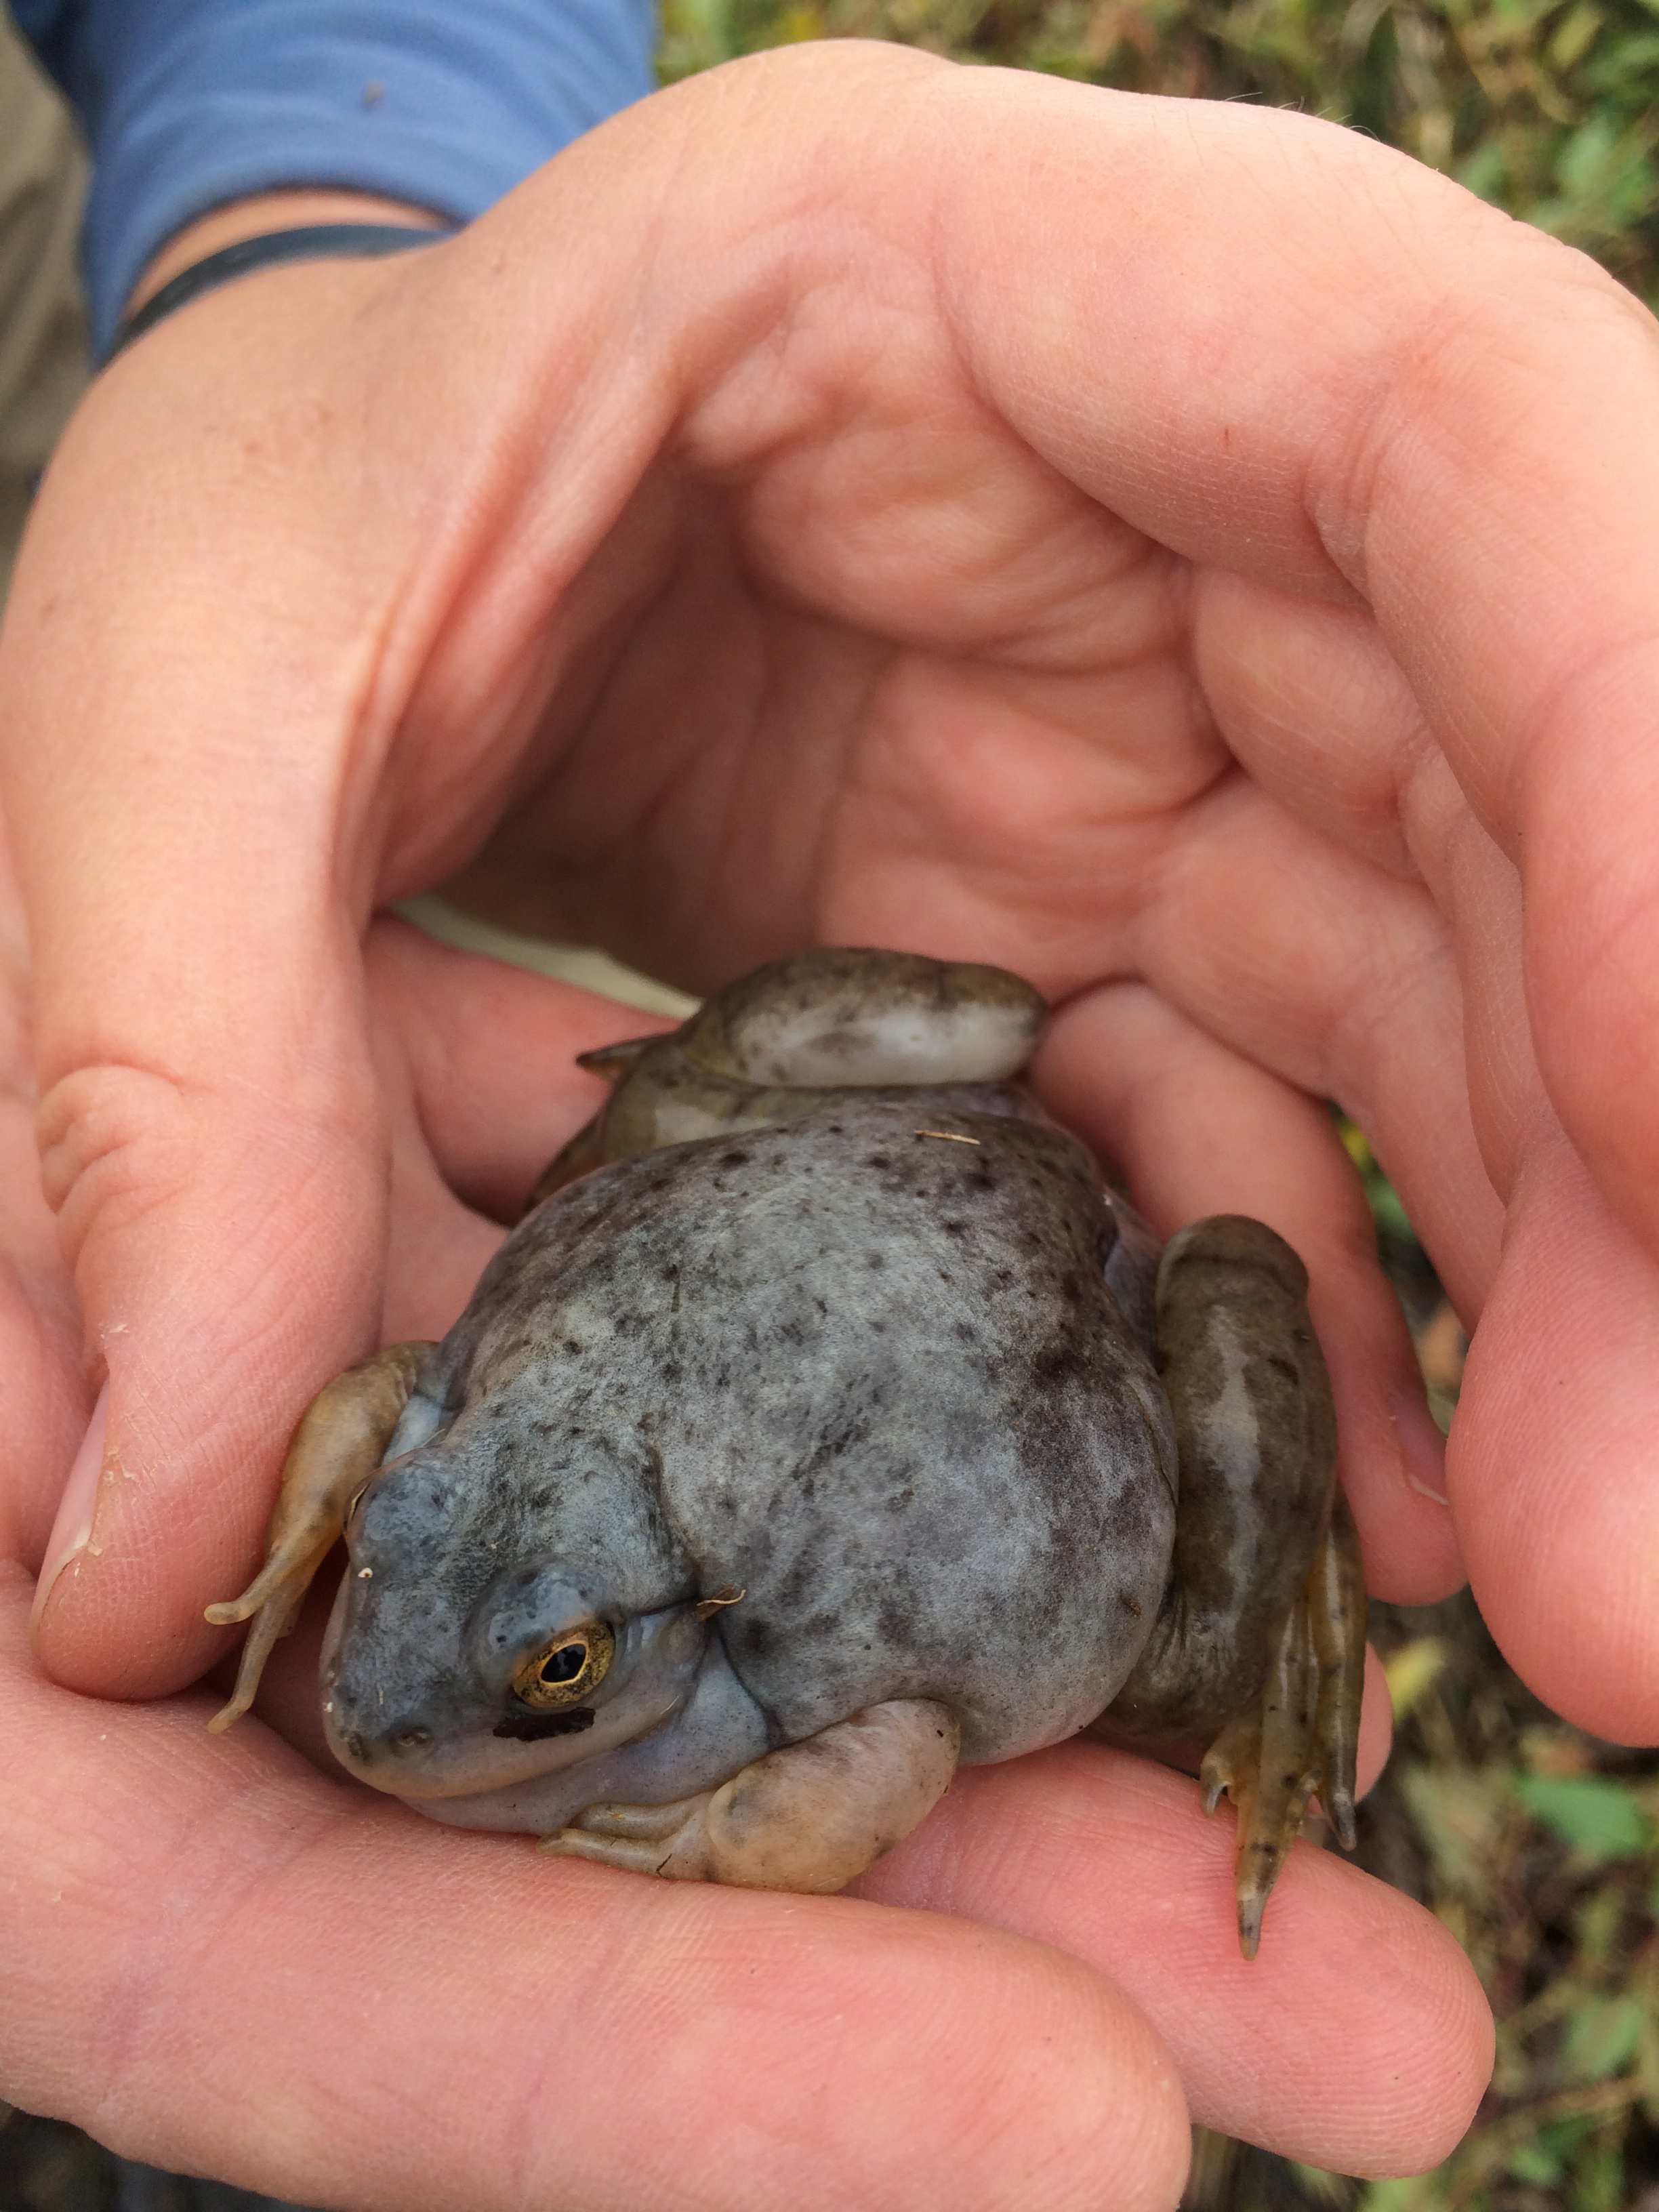 These blue colored frogs are thought to be a rare sight in the wild because their odd coloring makes them much more visible to predators | Iowa DNR